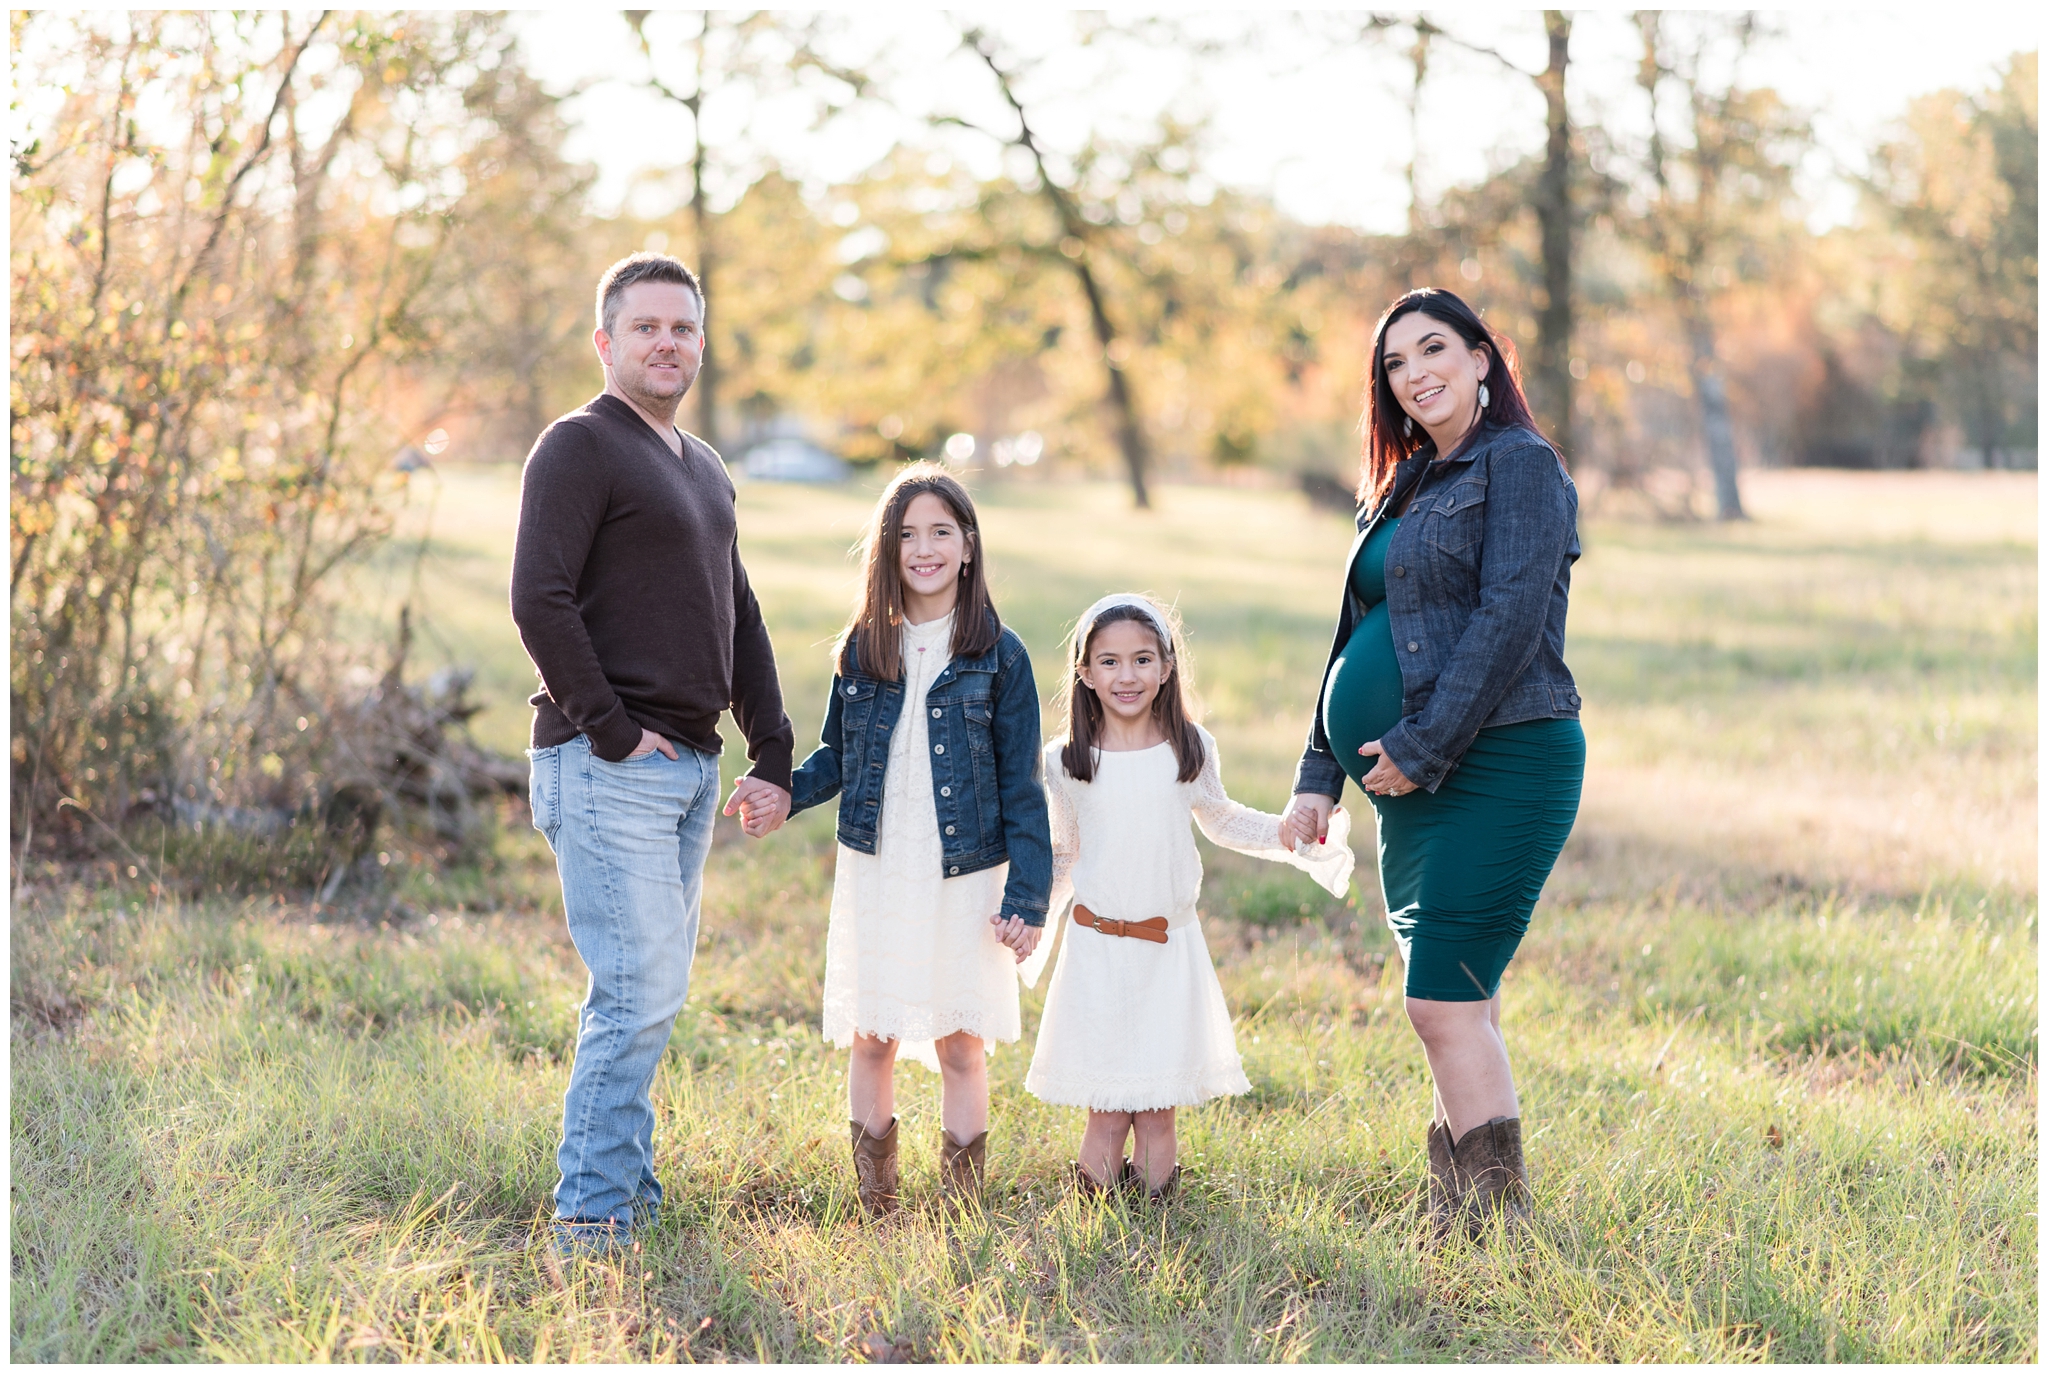 Kingwood family photographer - fall maternity portrait session for Little Ones client in Kingwood